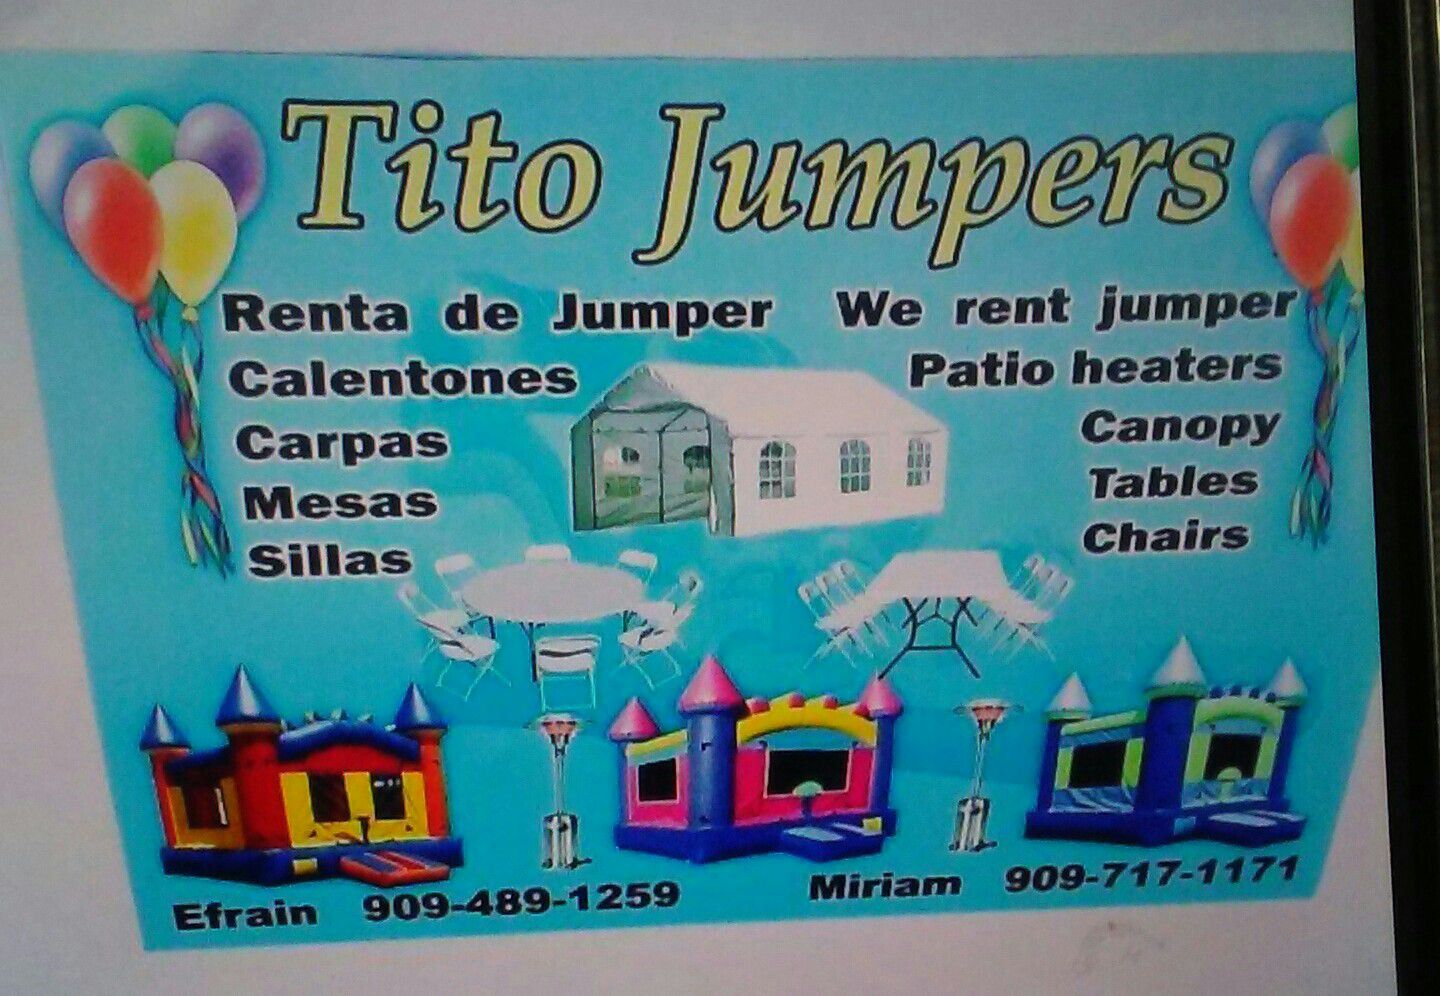 Tito jumpers